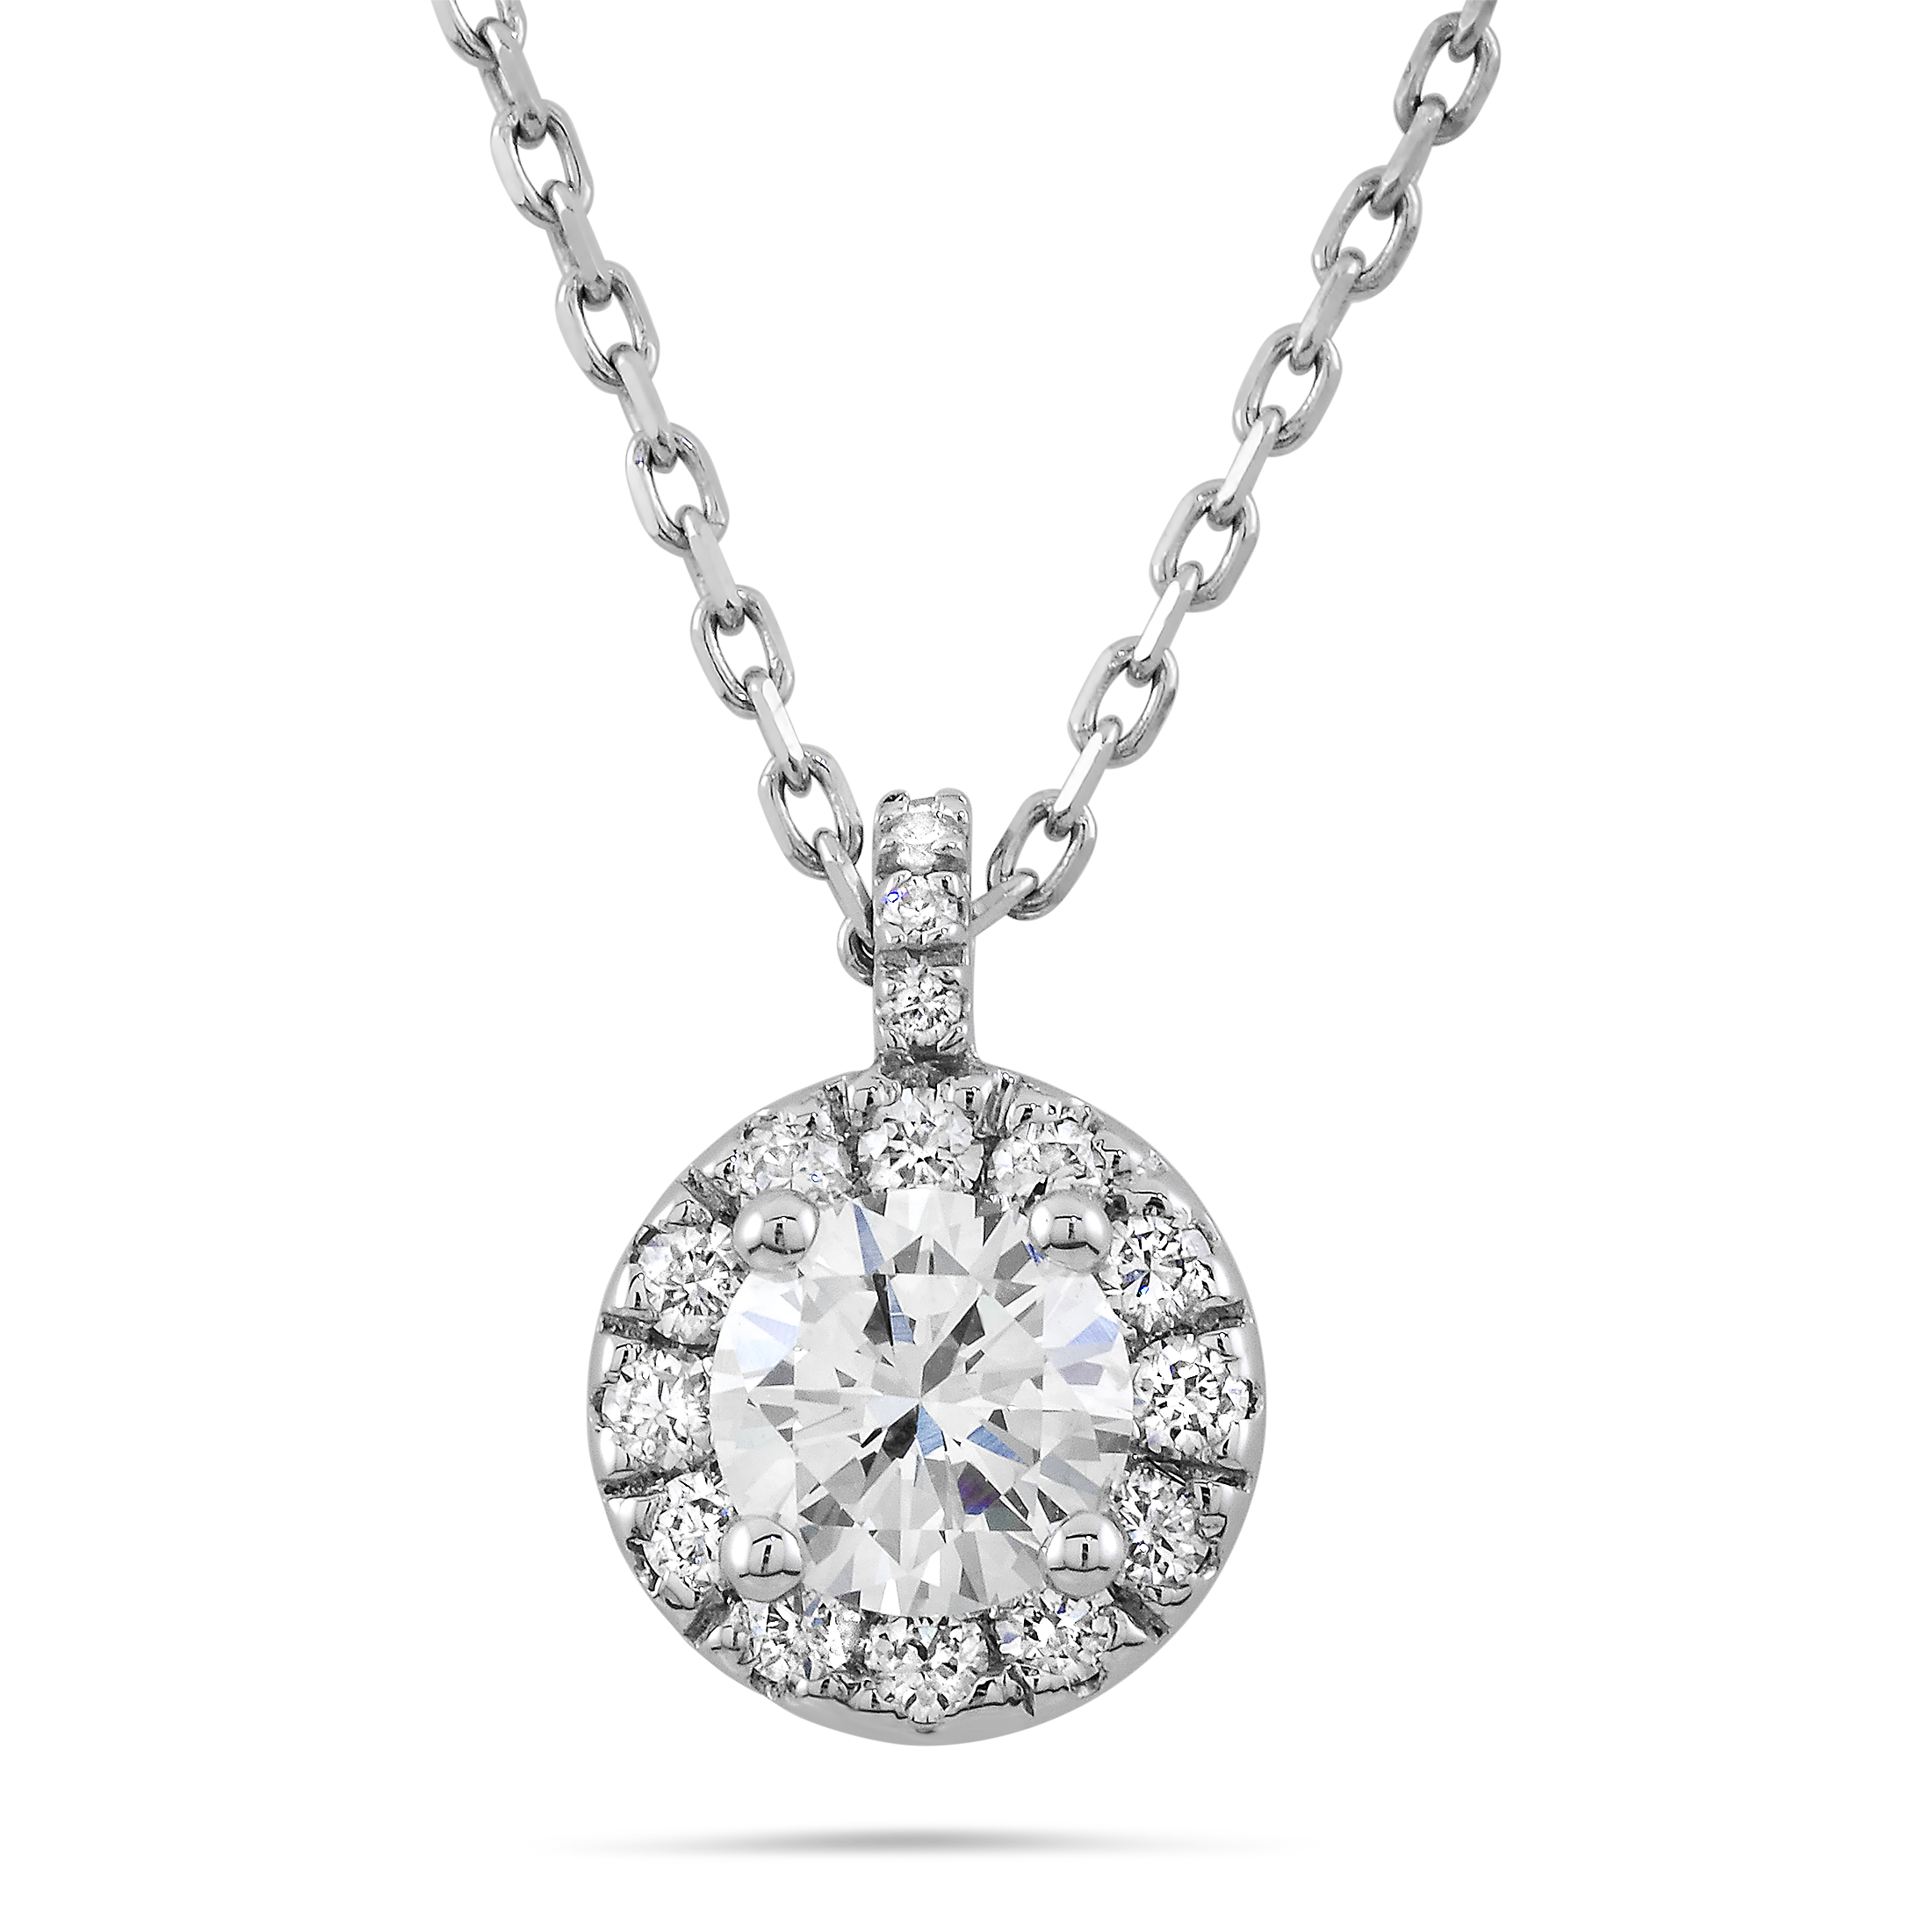 Necklace Png Images Free Download